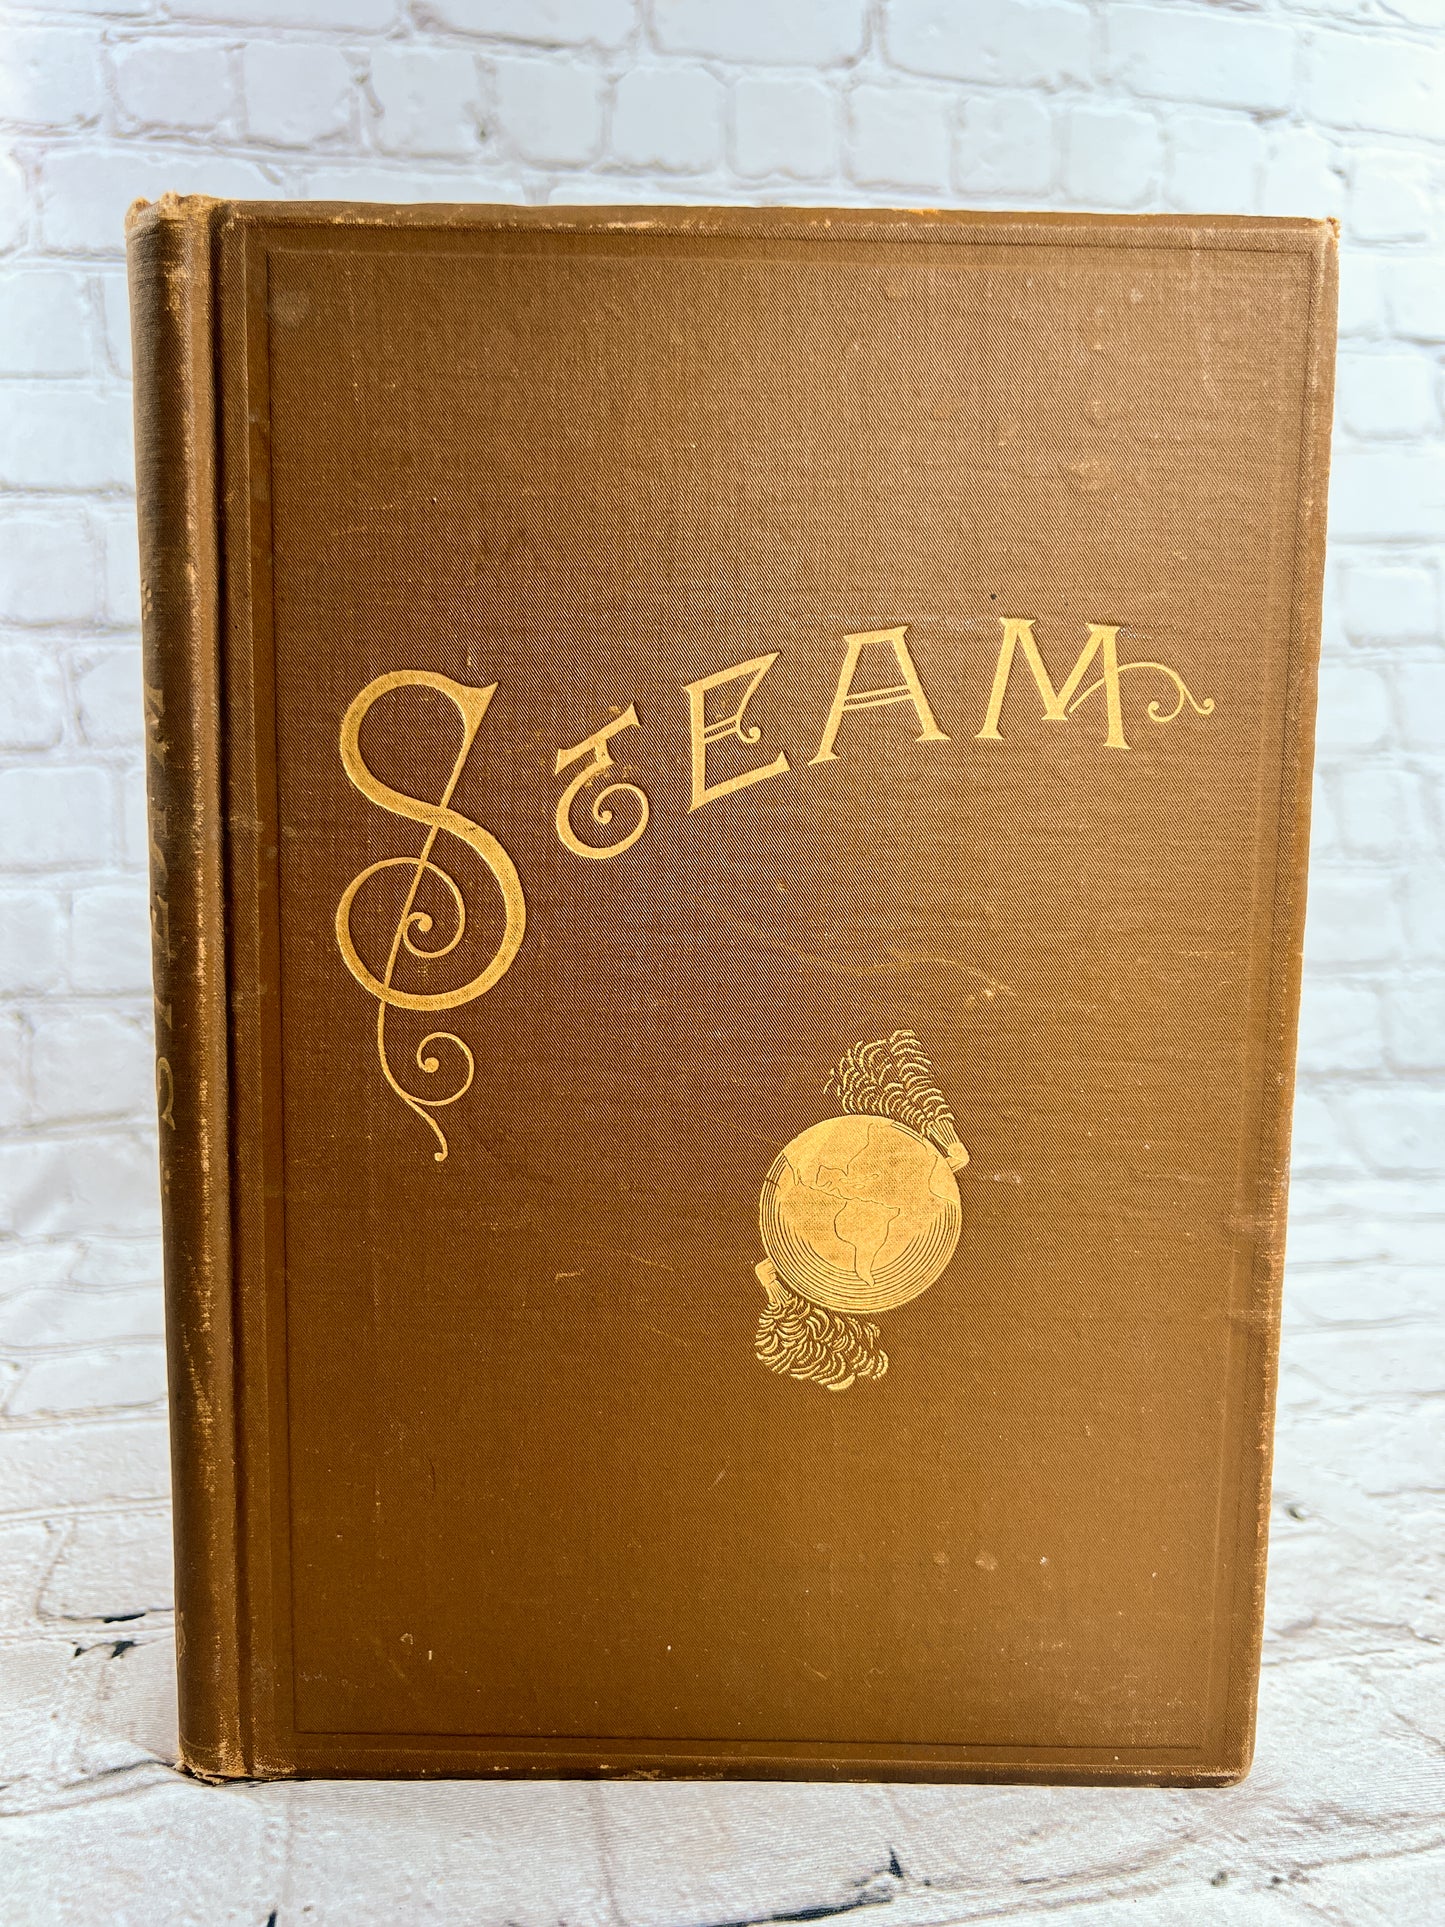 Steam its Generation and Use (Babcock & Wilcox Co.) [22nd Edition · 1890]